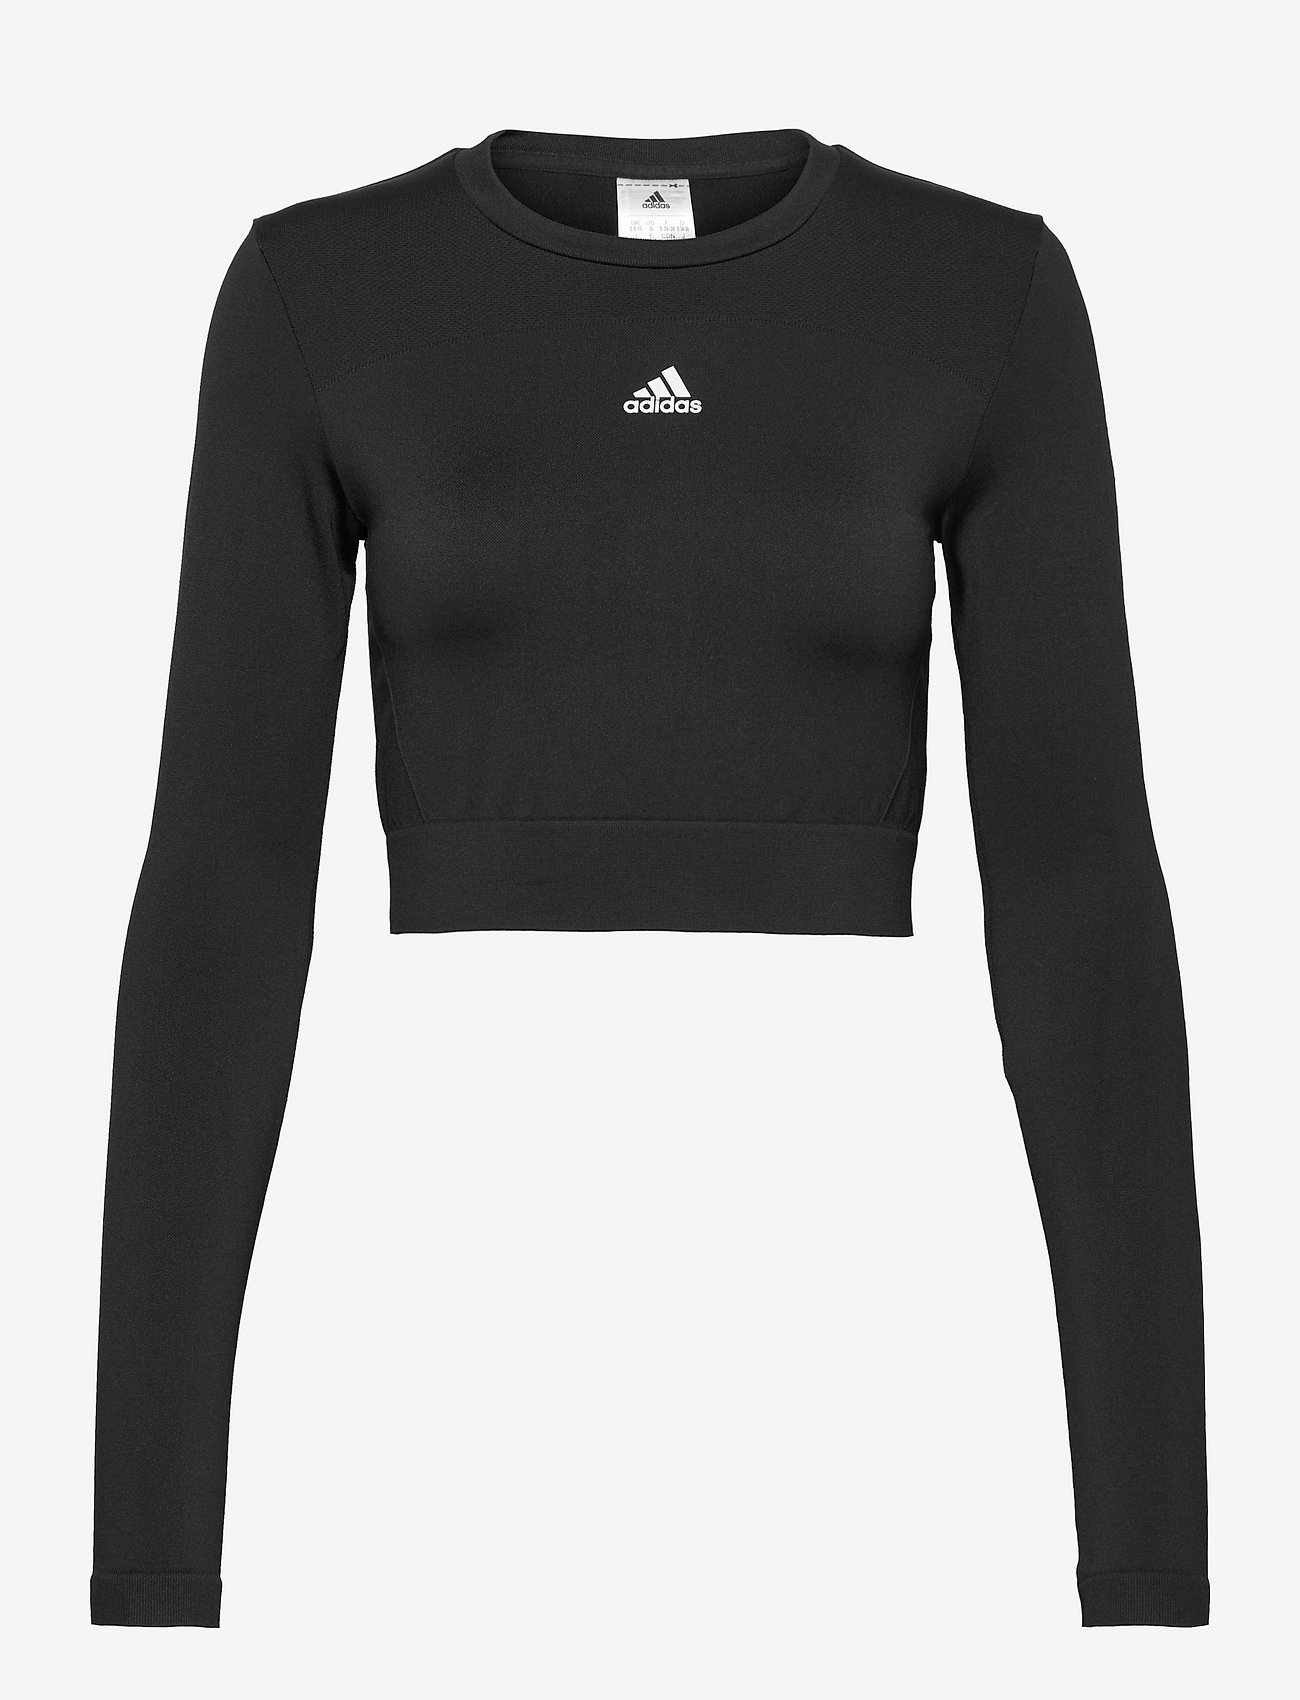 adidas Performance - adidas AEROKNIT Seamless Fitted Cropped Long-Sleeve Top - crop tops - black/white - 0